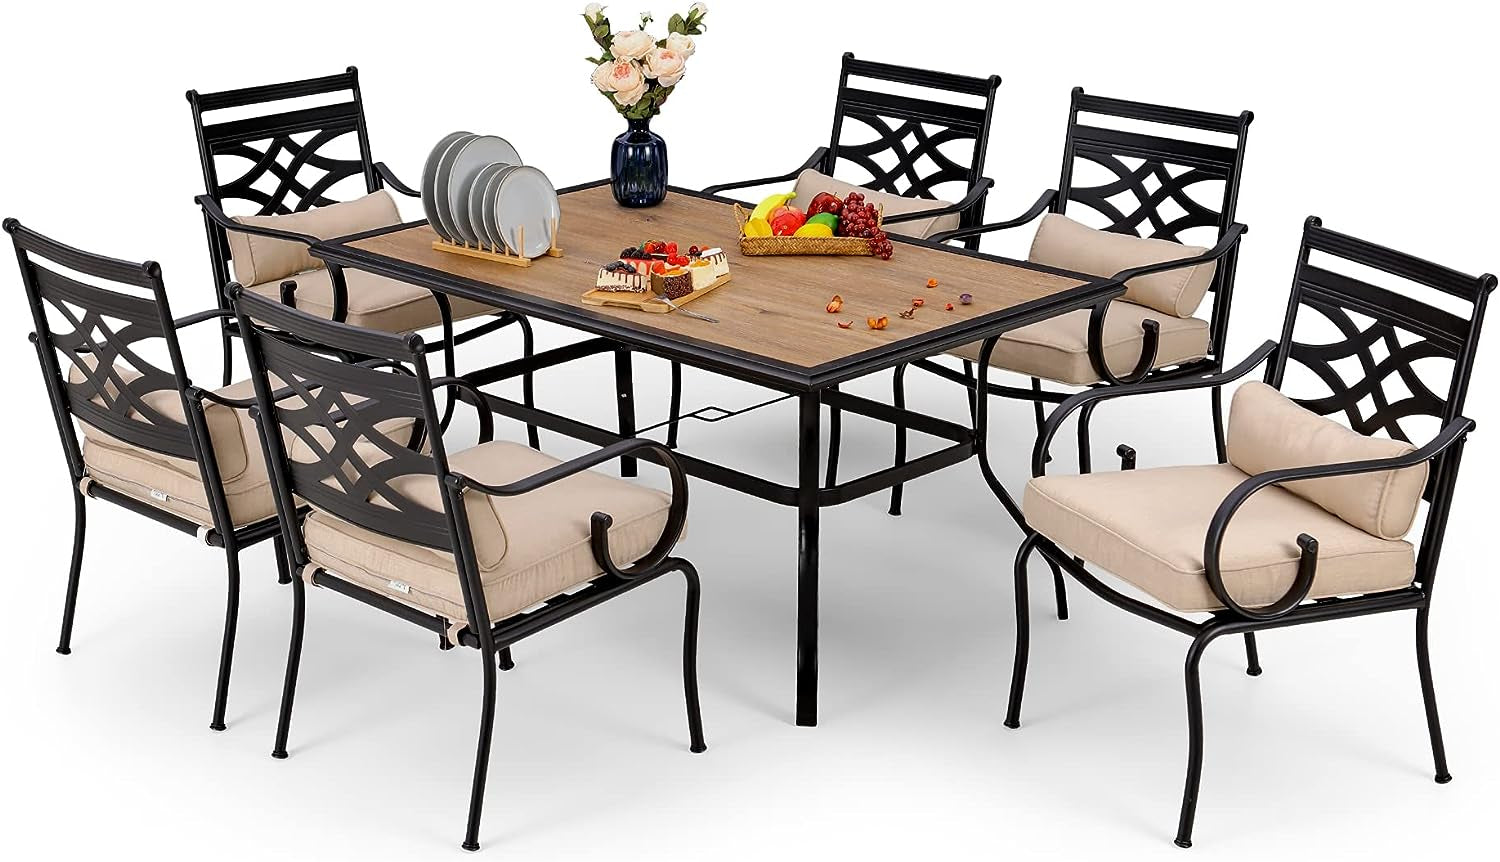 Patio Dining Set for 6, 7 PCS Outdoor Dining Sets - 1 Rectangle 37X60In Dining Table (1.57" Umbrella Hole) & 6 Patio Dining Chairs,Metal Patio Furniture for Outdoor Kitchen Lawn and Garden